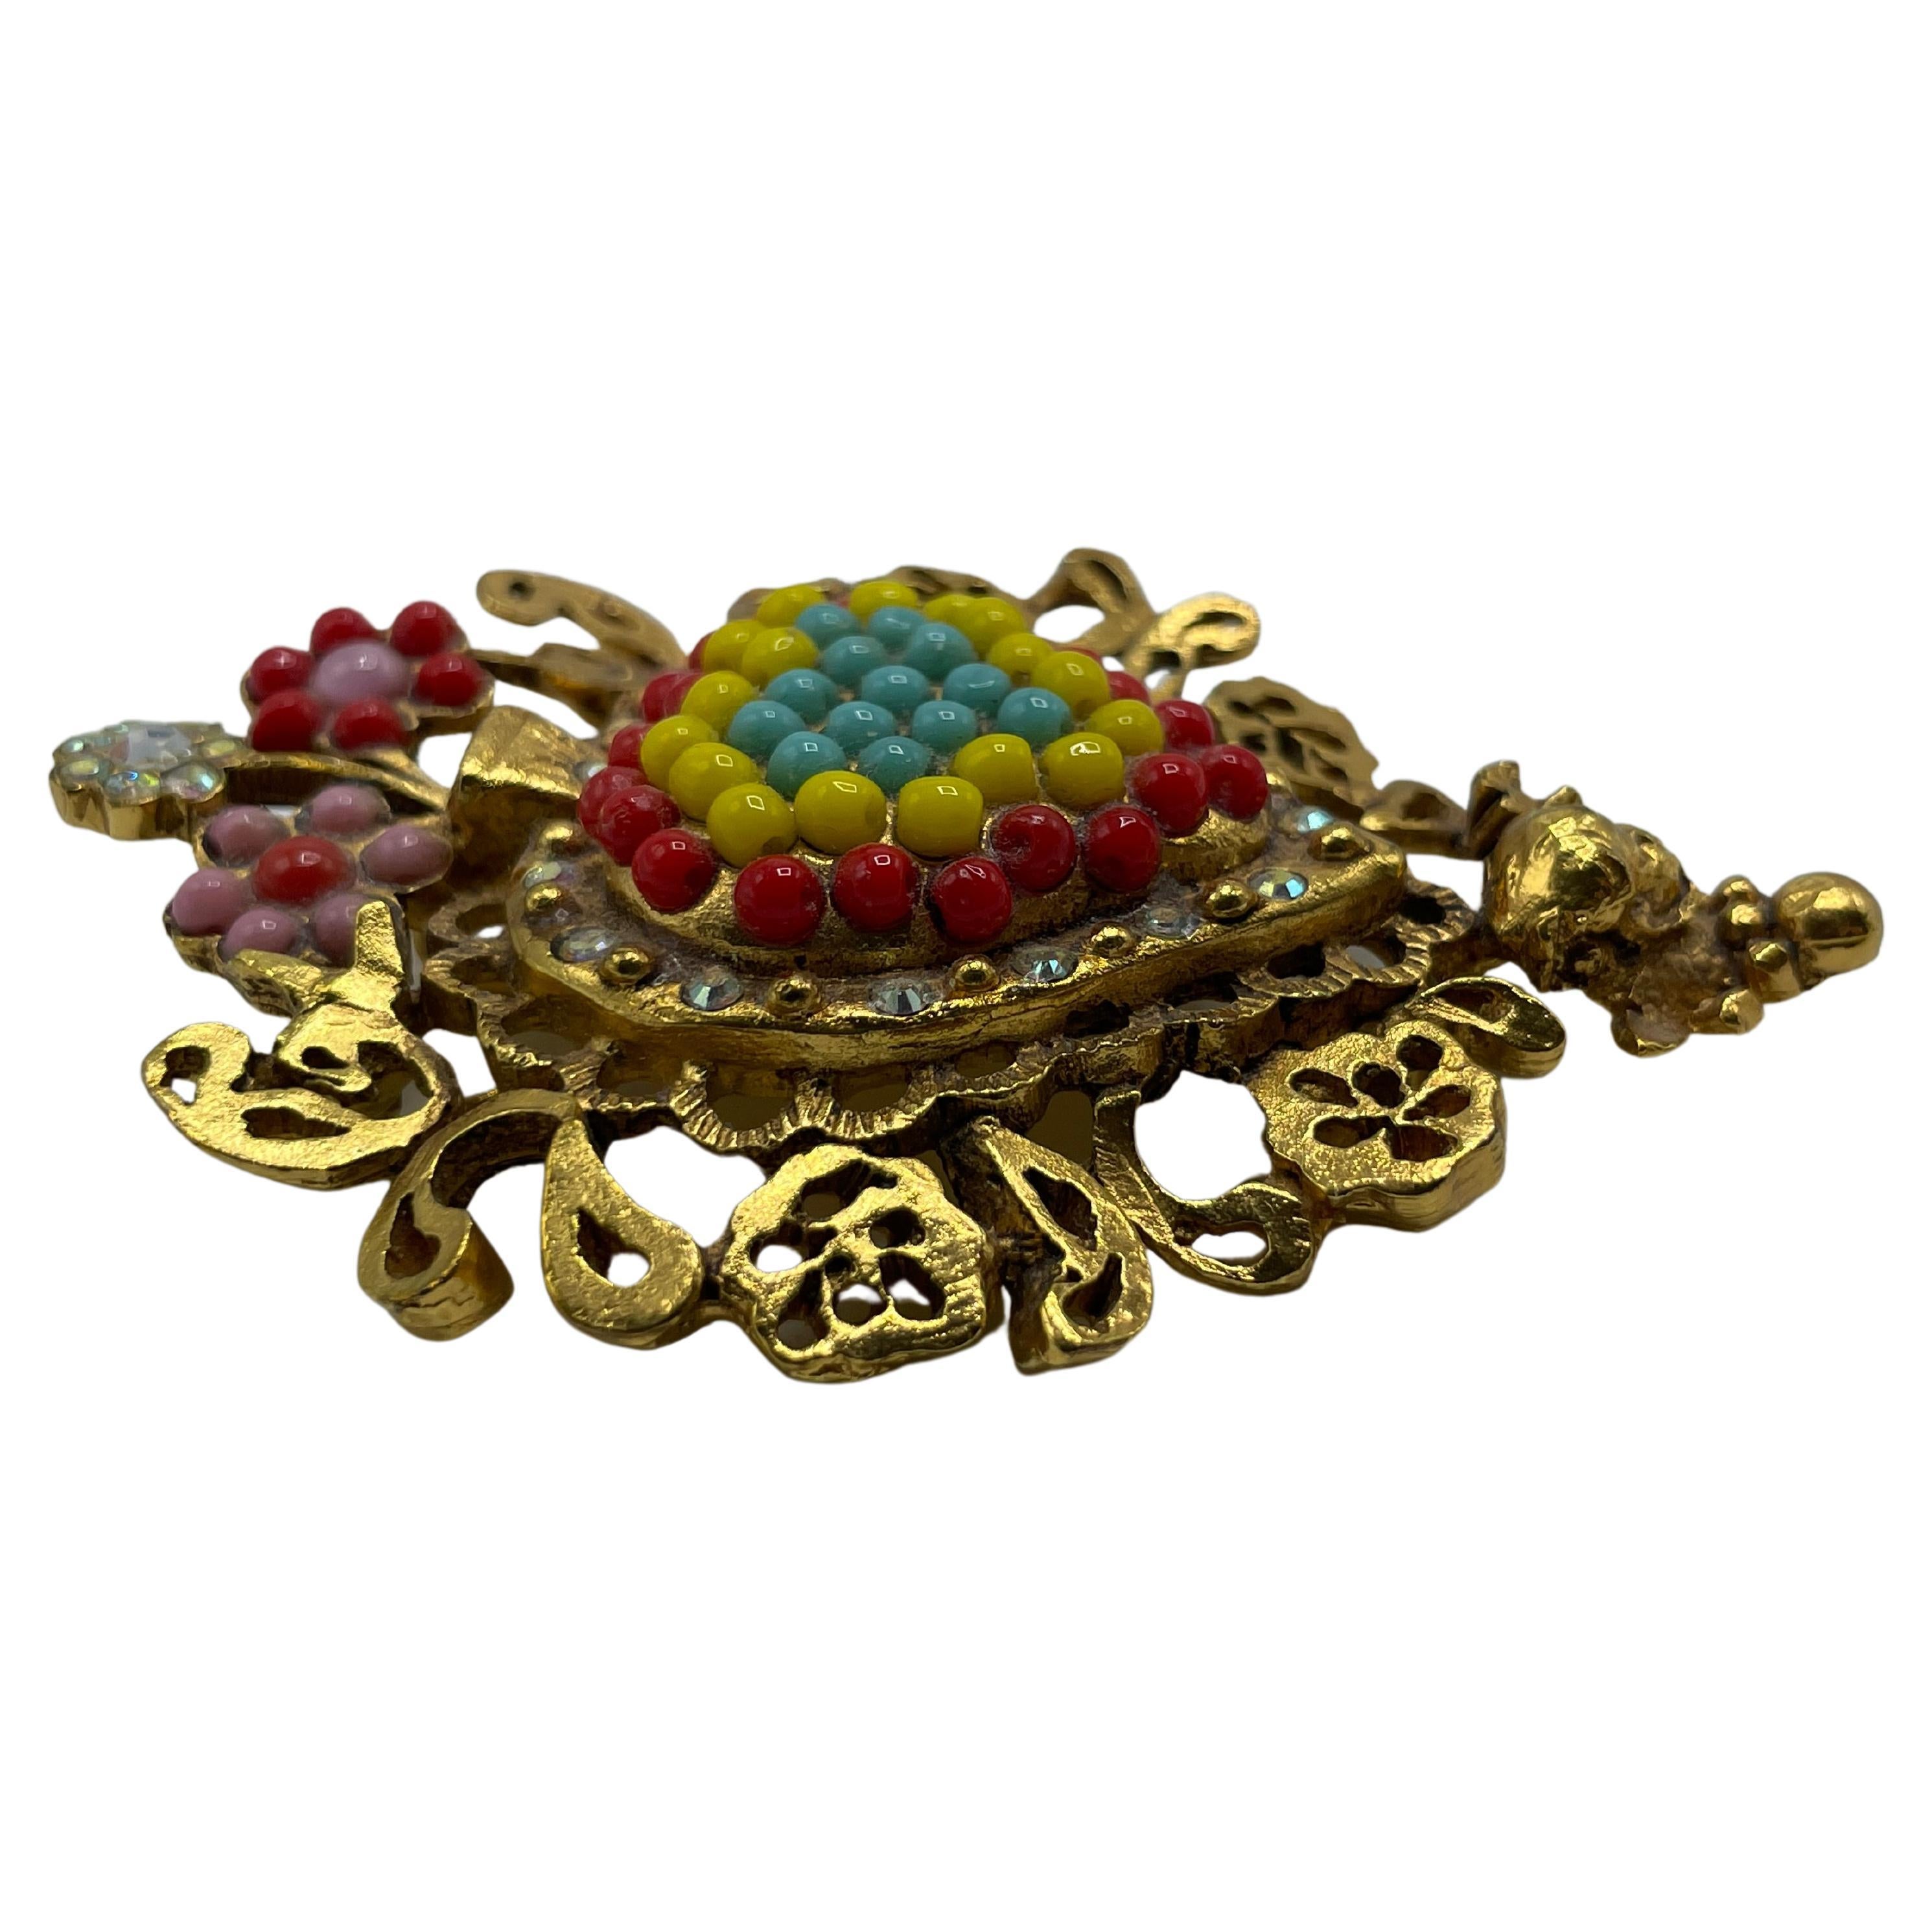 Christian Lacroix Vintage Gold Toned Brooch. A magnificent brooch in the shape of a red, blue, and yellow heart encircled by a row of rhinestones and gold bubbles. The center appears to be a vase holding three flowers.   Signature of Christian